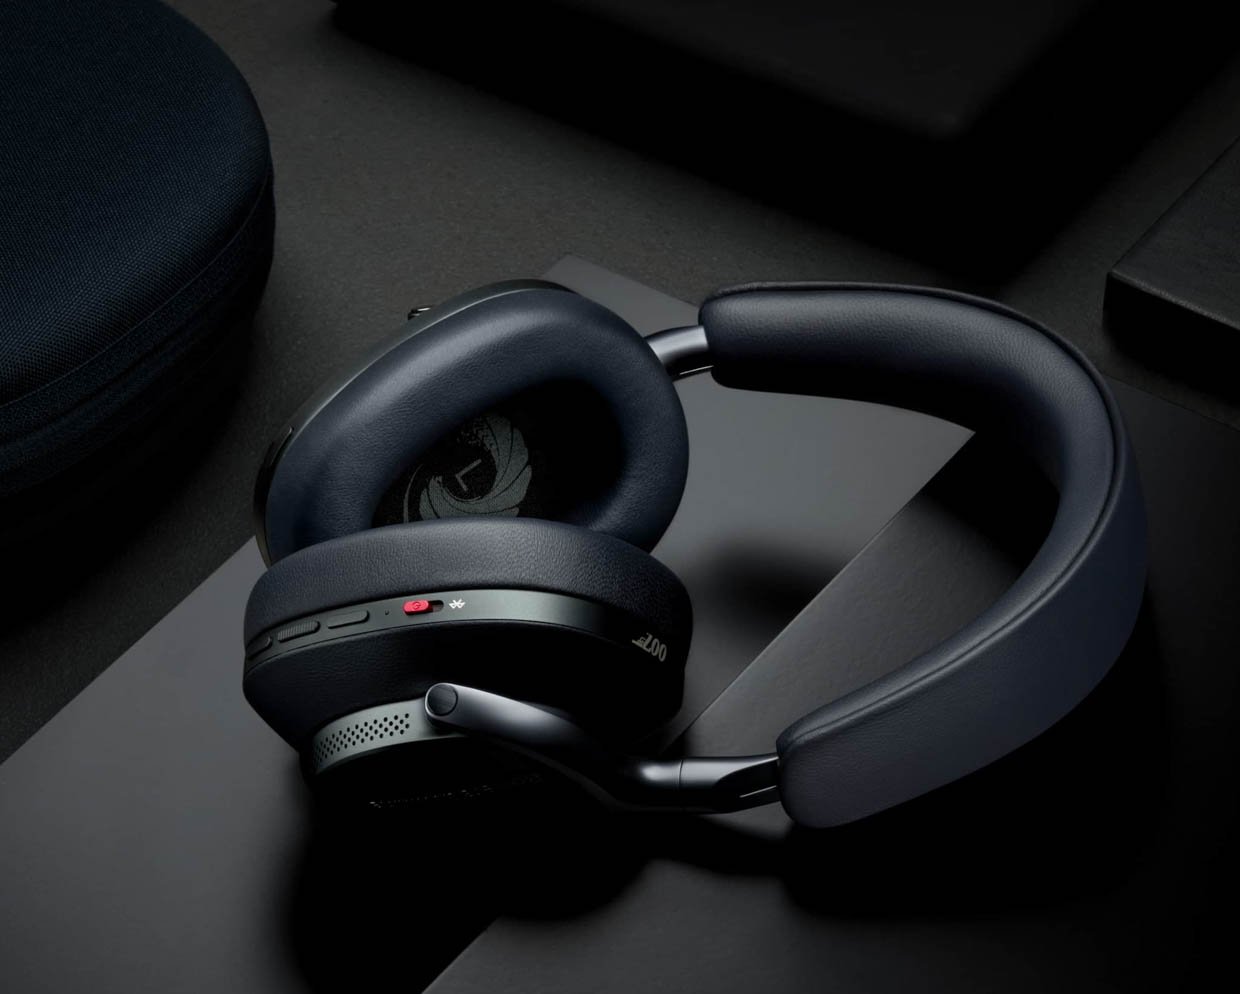 Bowers & Wilkins Px8 007 Edition Headphones